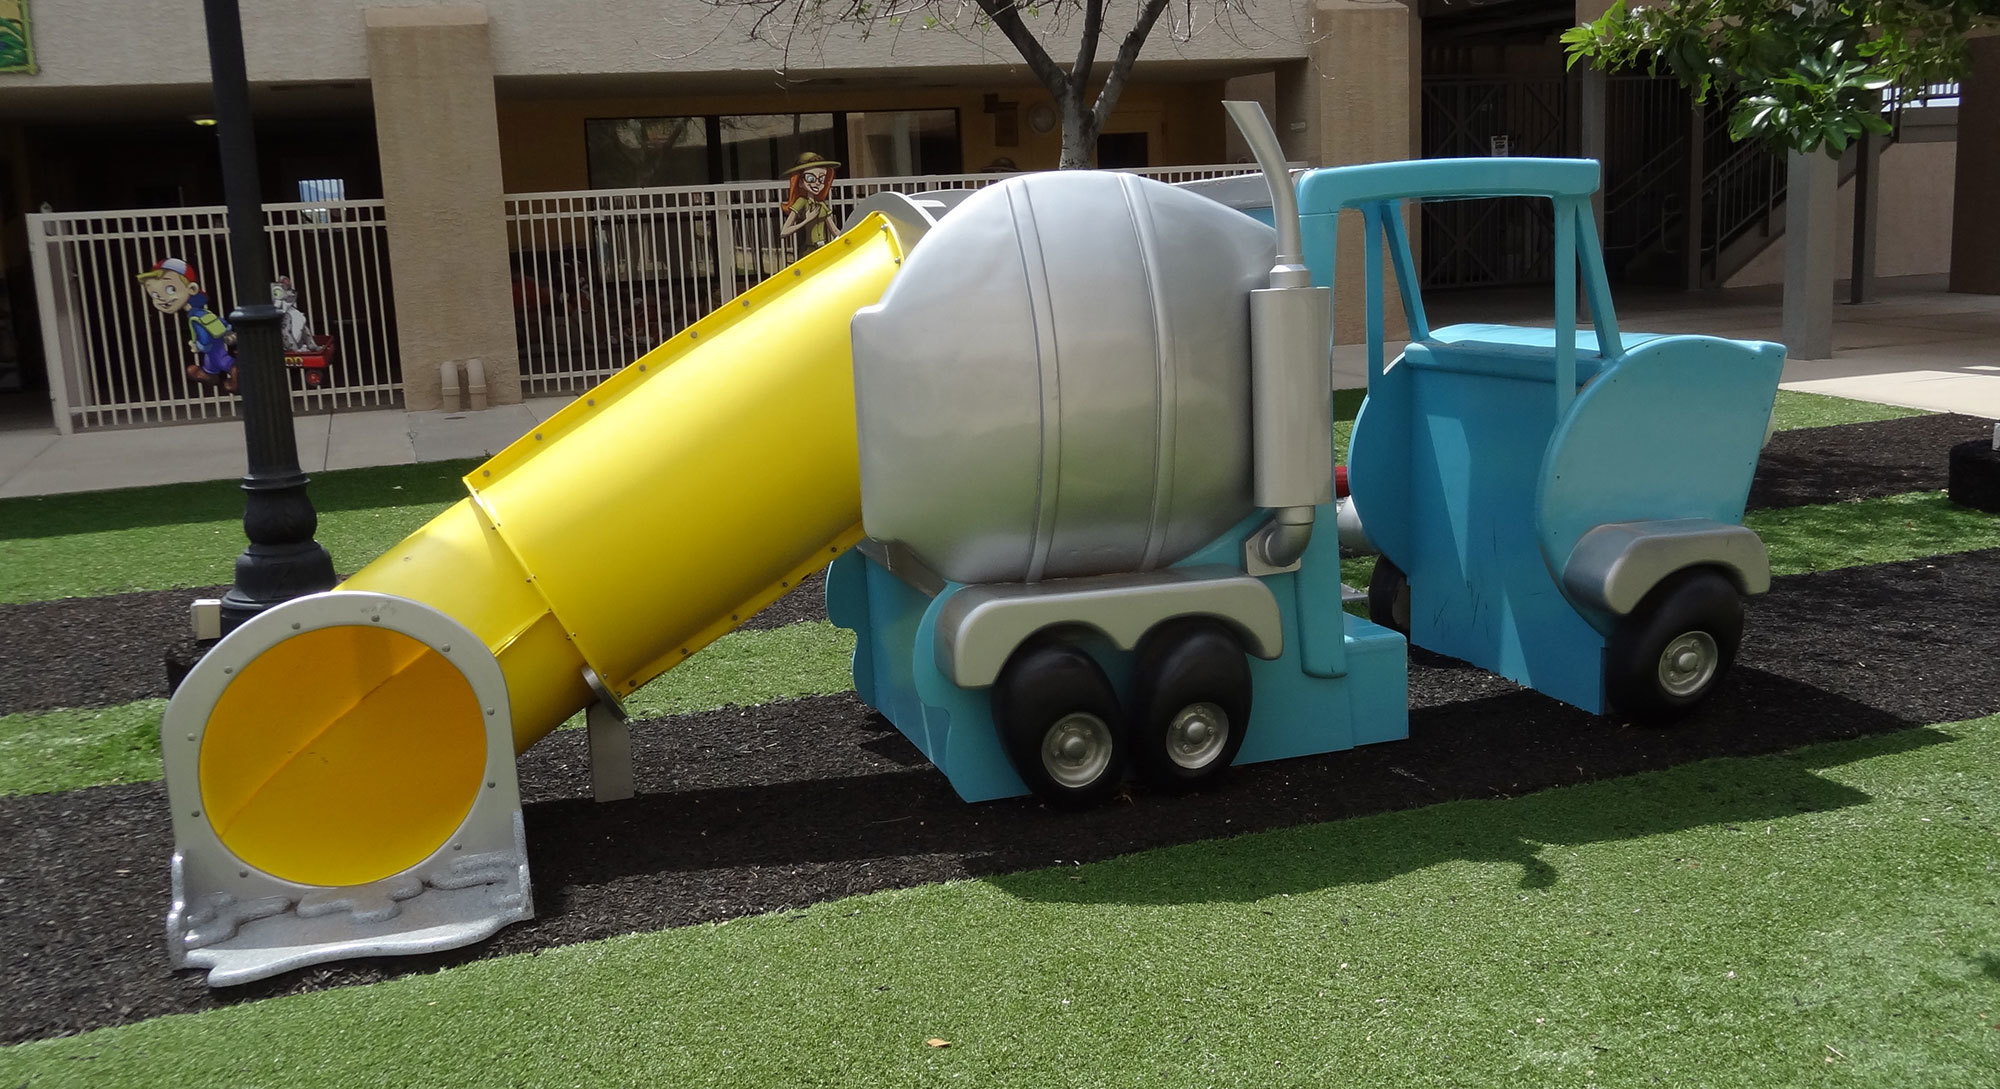 Cement truck Themed Play Feature with yellow slide in Big City Themed outdoor Play Area at Casas Church